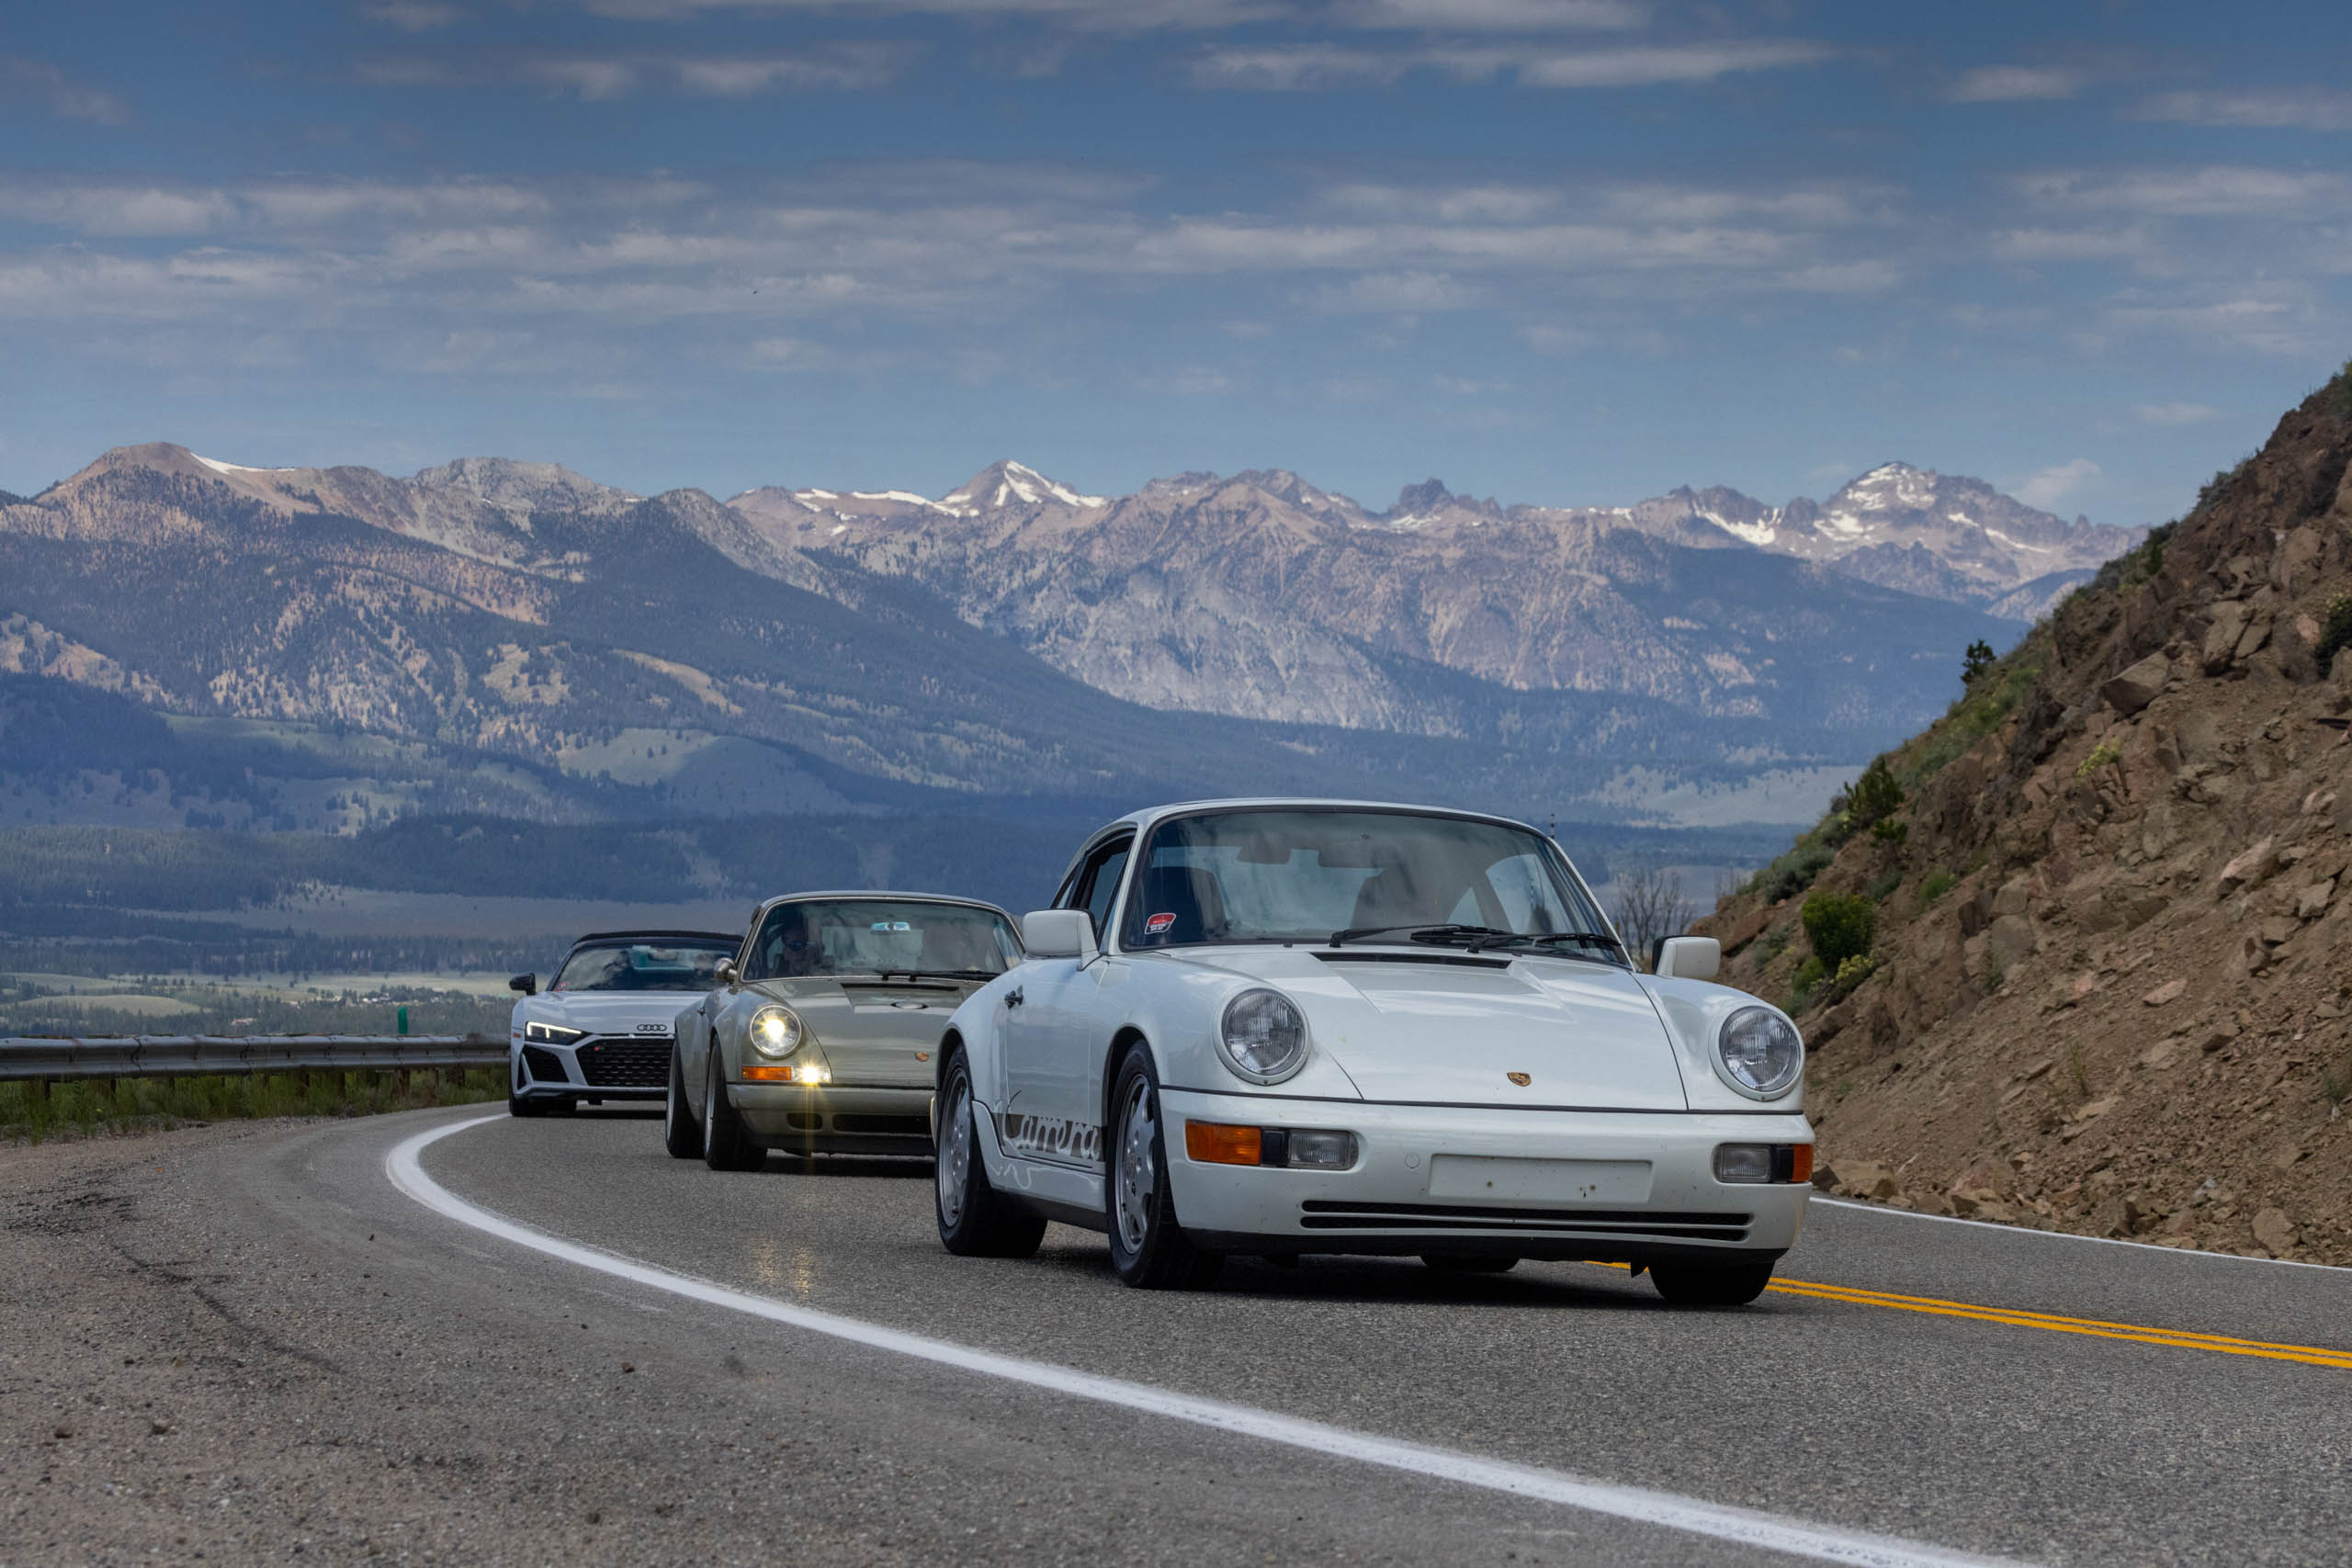 A white porsche 911 driving down a road surrounded by majestic mountains.